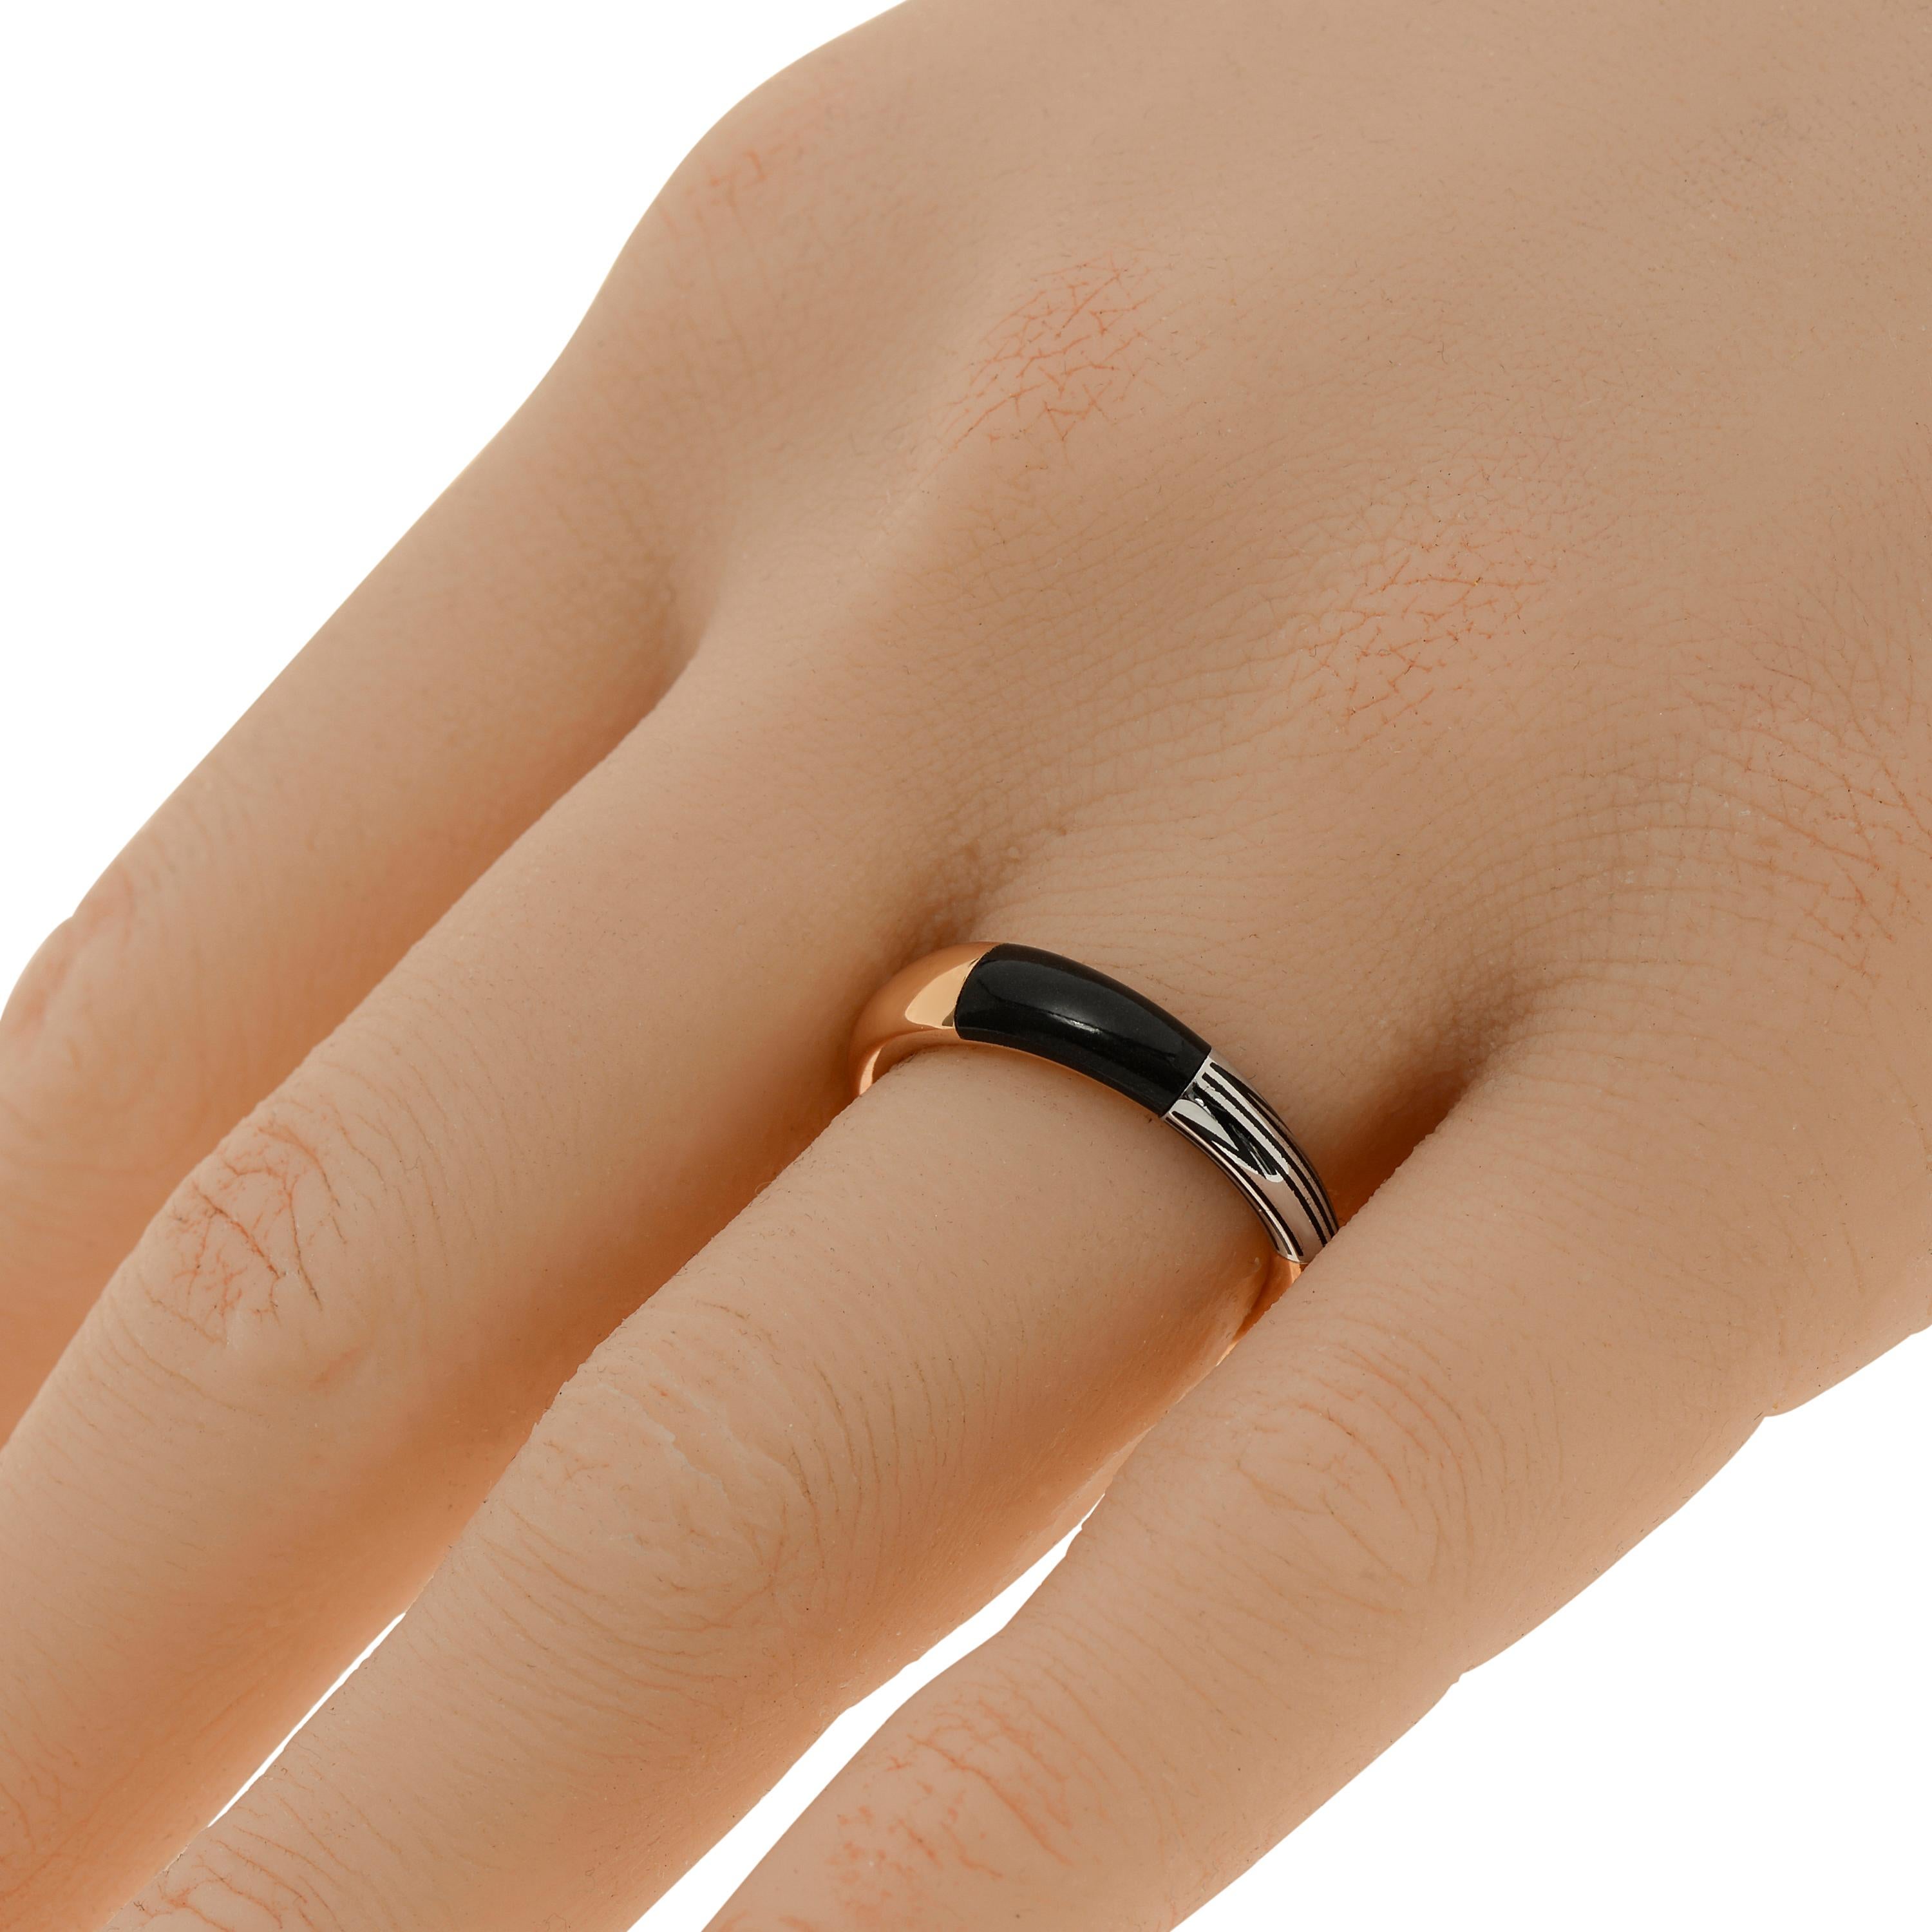 Mimi Milano 18K rose gold and 18K white gold band ring features Onyx in perfect harmony with two toned 18k Gold in an iconic design. The ring size is 6.5 (53.1). The band width is 2mm - 4.8mm. The weight is 2.92g.
